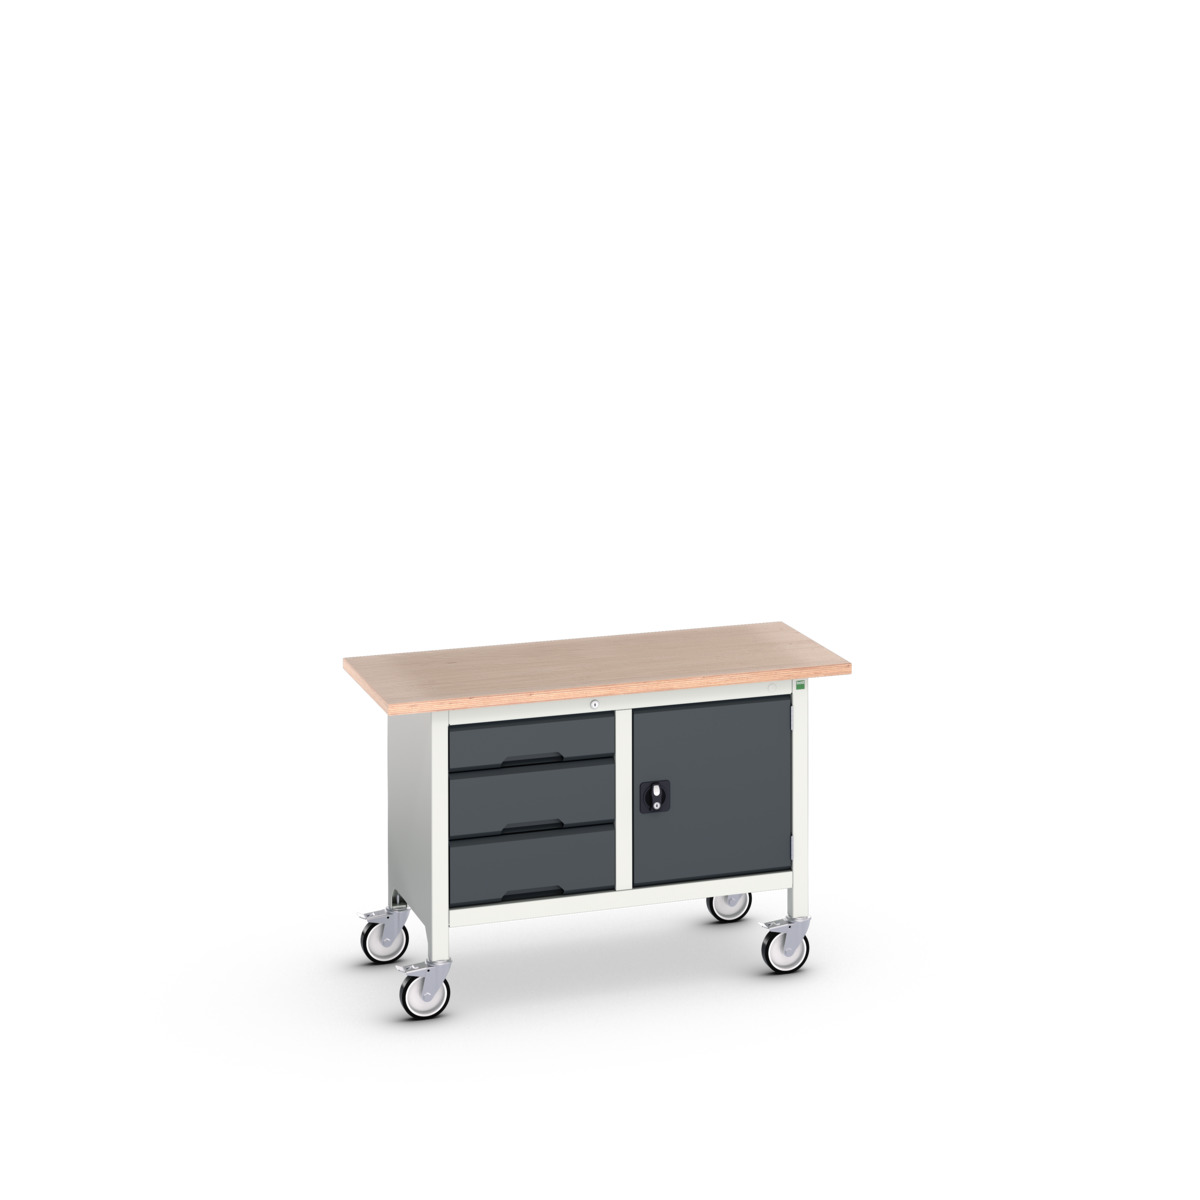 16923203. - verso mobile storage bench (mpx)